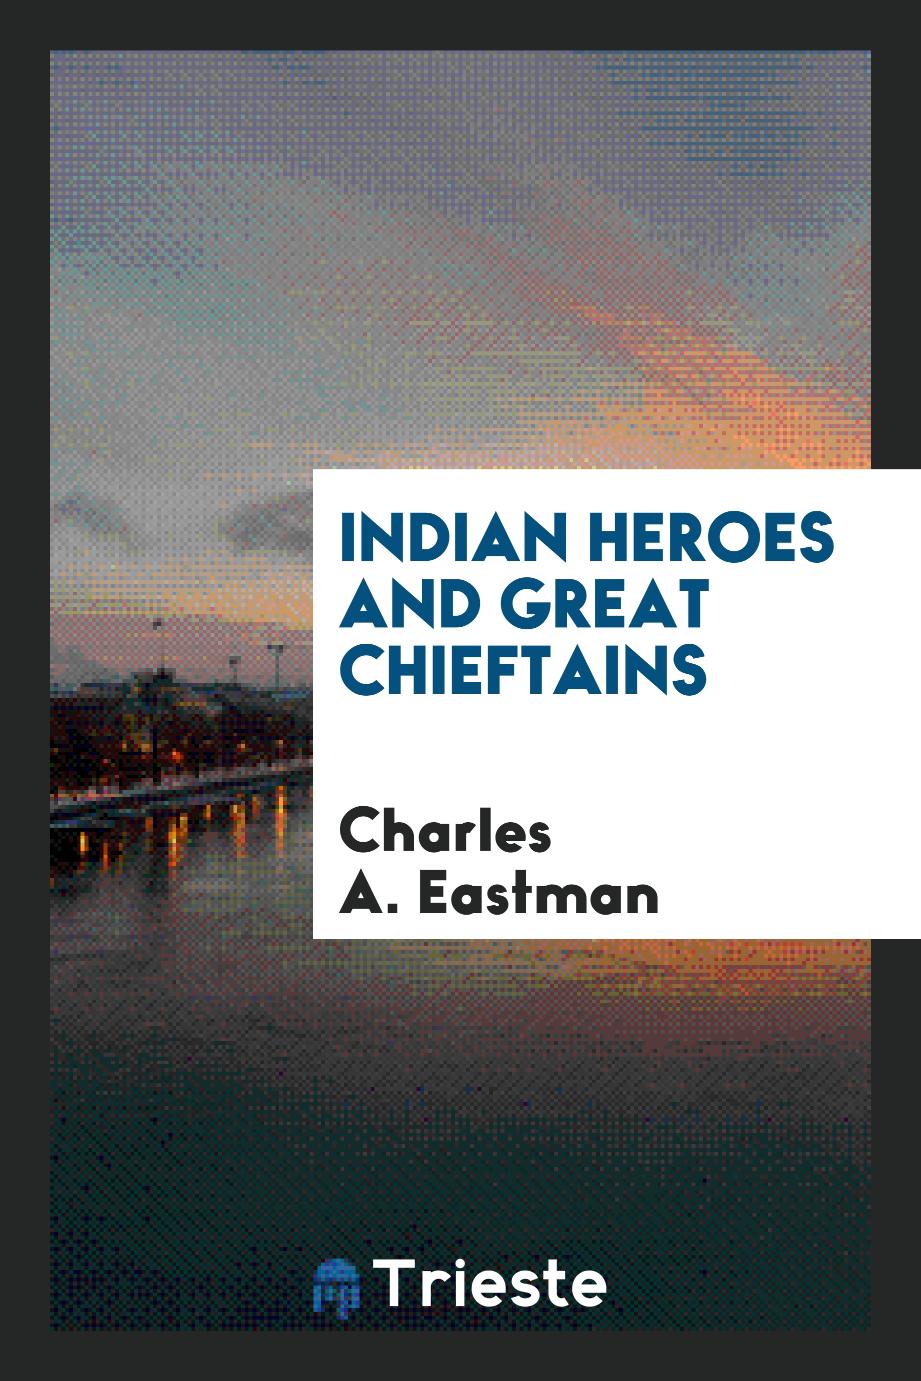 Charles A. Eastman - Indian heroes and great chieftains